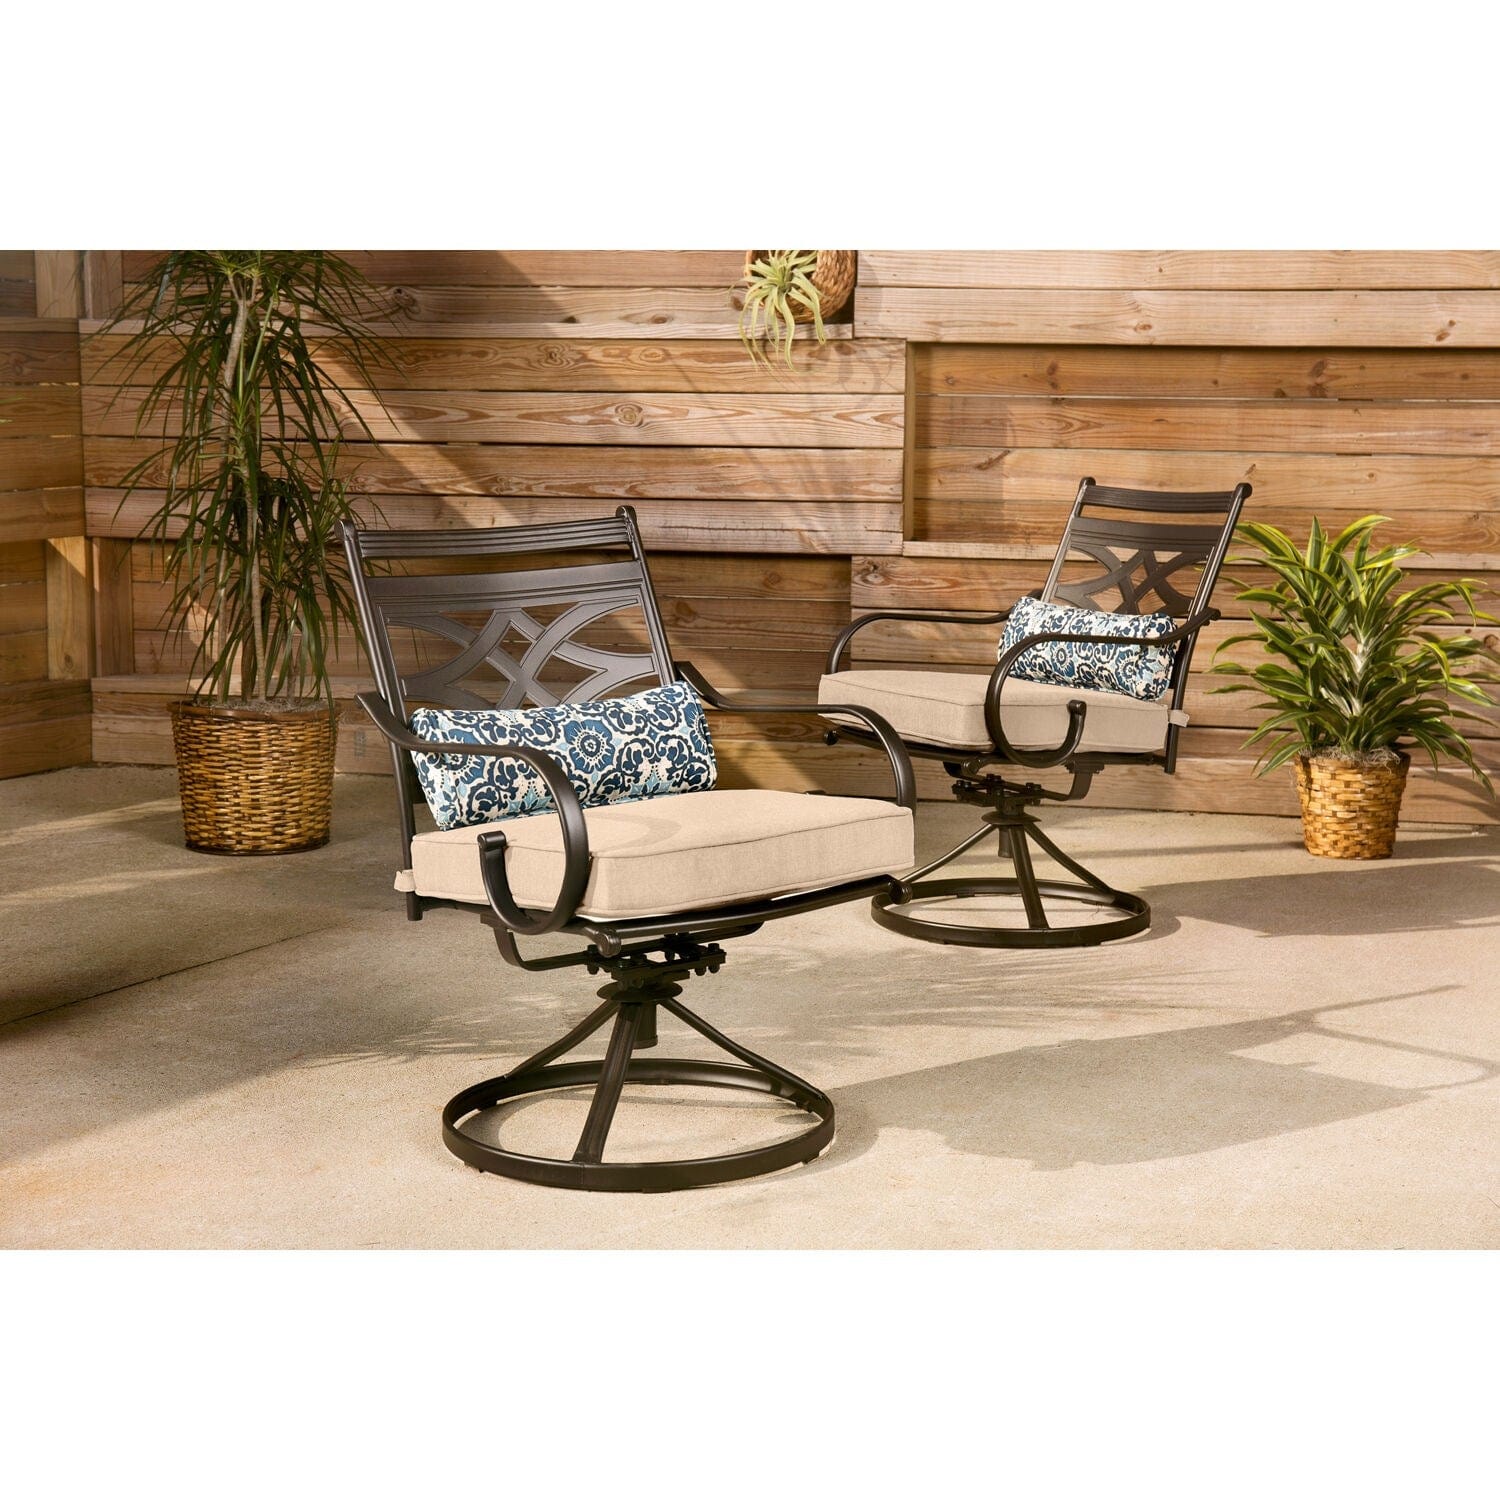 Hanover Outdoor Dining Set Hanover Montclair 5-Piece Patio Dining Set in Country Cork with 4 Swivel Rockers and a 40-Inch Square Table | MCLRDN5PCSQSW4-TAN